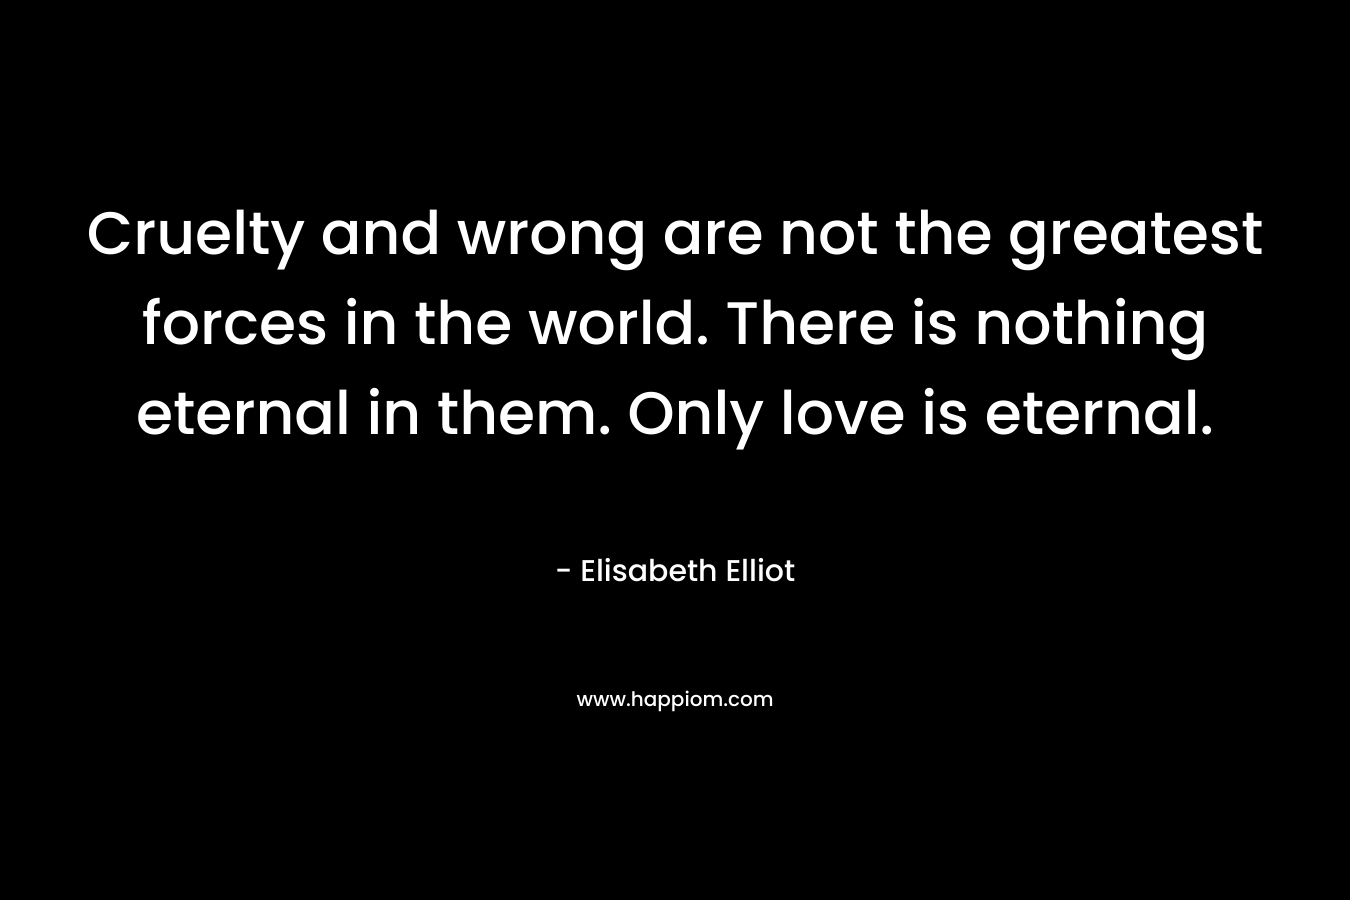 Cruelty and wrong are not the greatest forces in the world. There is nothing eternal in them. Only love is eternal.